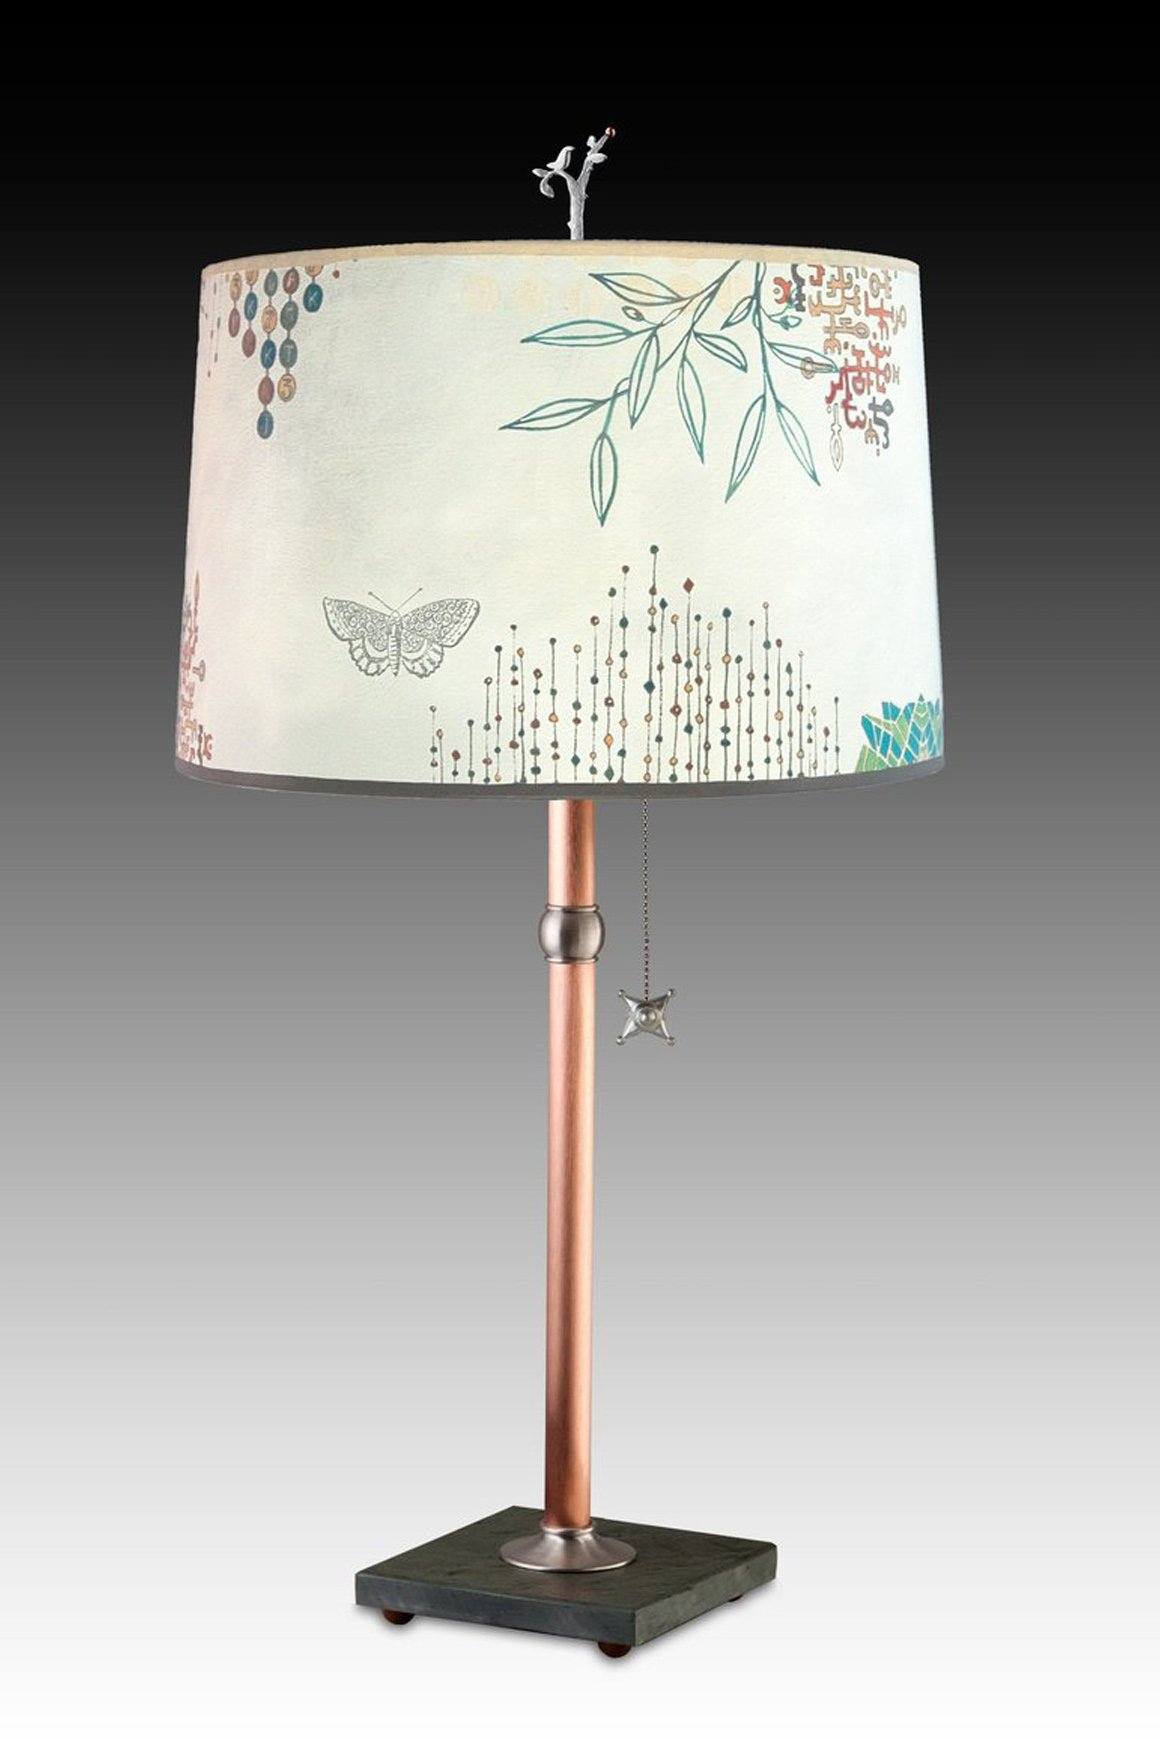 Janna Ugone &amp; Co Table Lamps Copper Table Lamp with Large Drum Shade in Ecru Journey